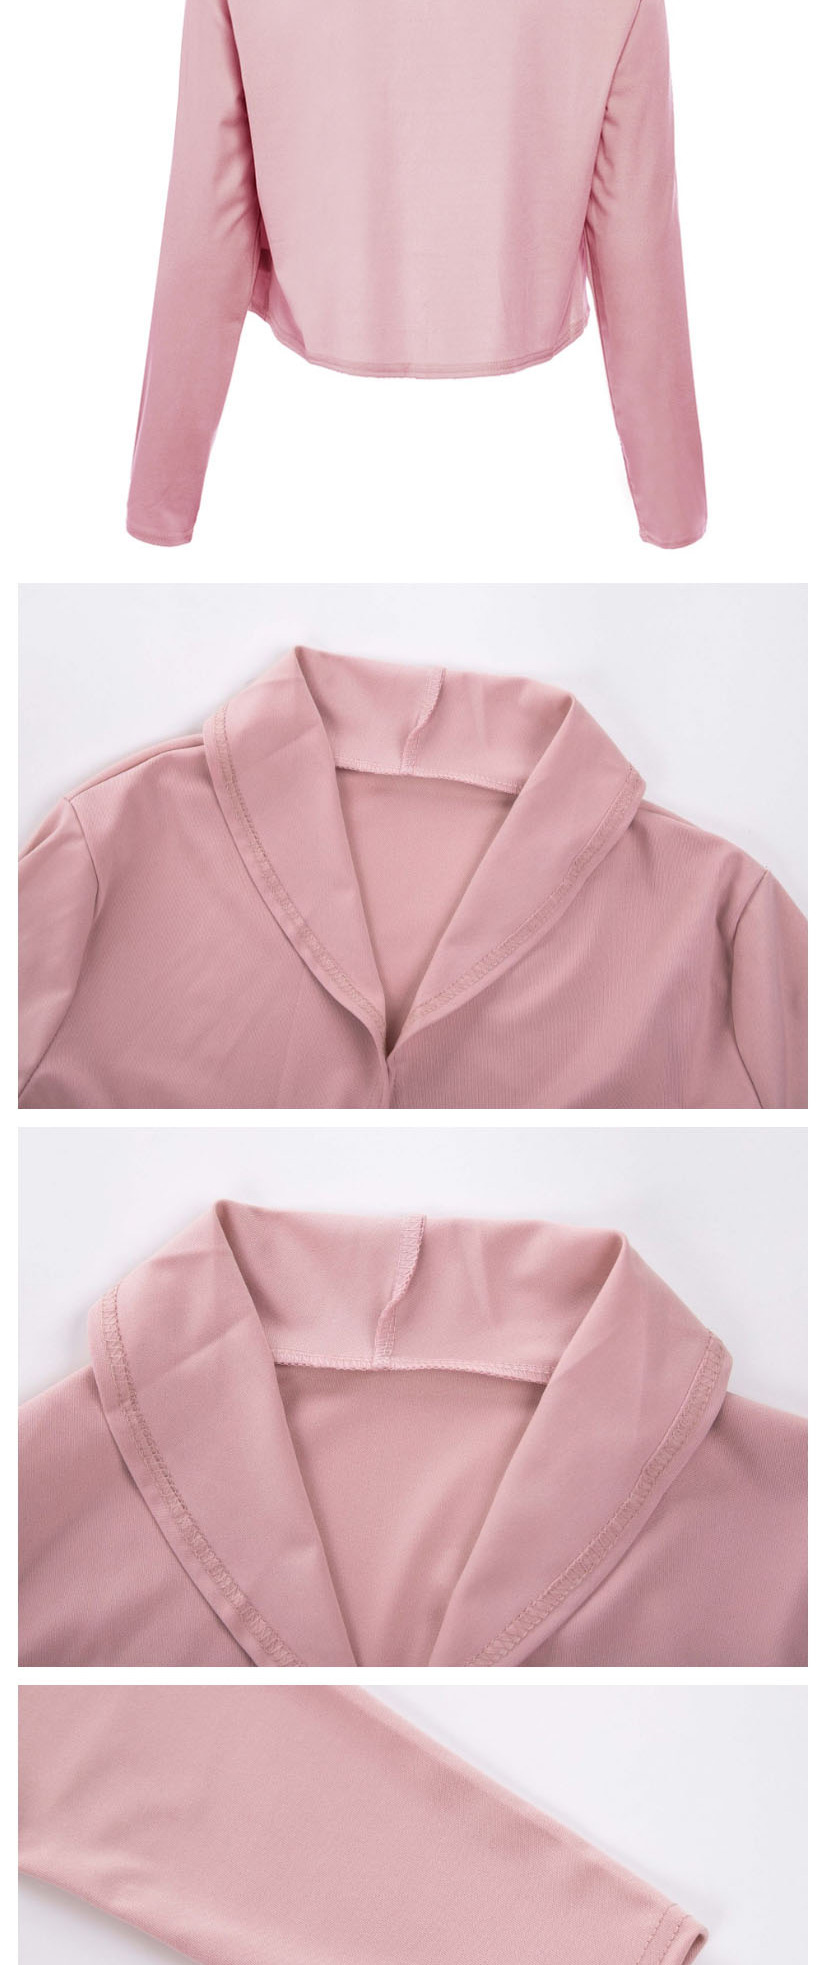 Fashion Pink Solid Color Lapel Cut-off Cardigan,Sunscreen Shirts